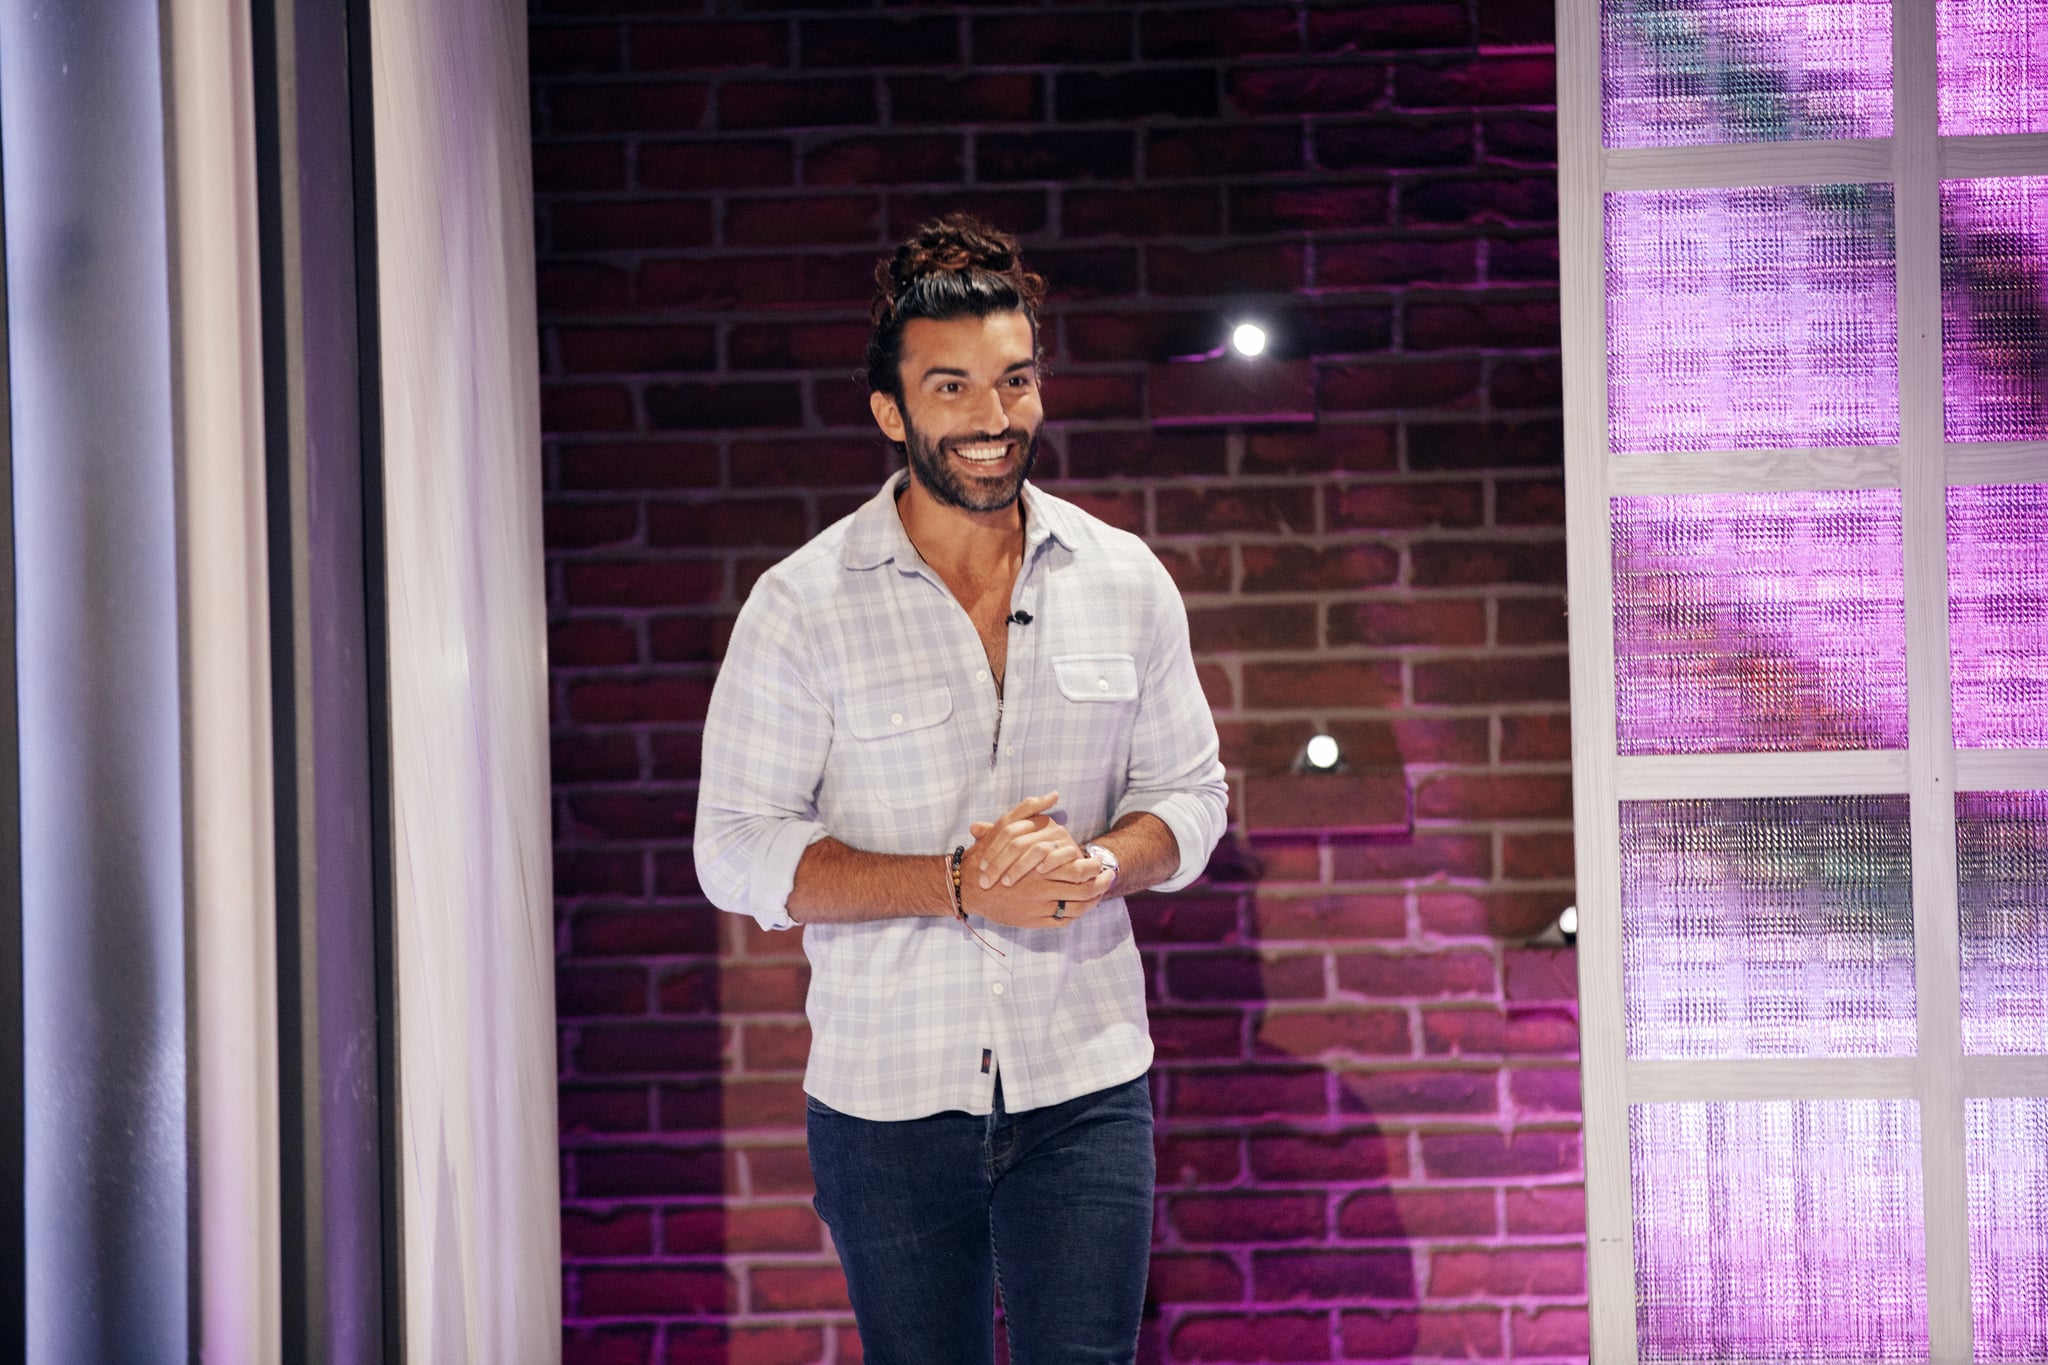 THE KELLY CLARKSON SHOW -- Episode 4153 -- Pictured: Justin Baldoni -- (Photo by: Weiss Eubanks/NBCUniversal/NBCU Photo Bank via Getty Images)